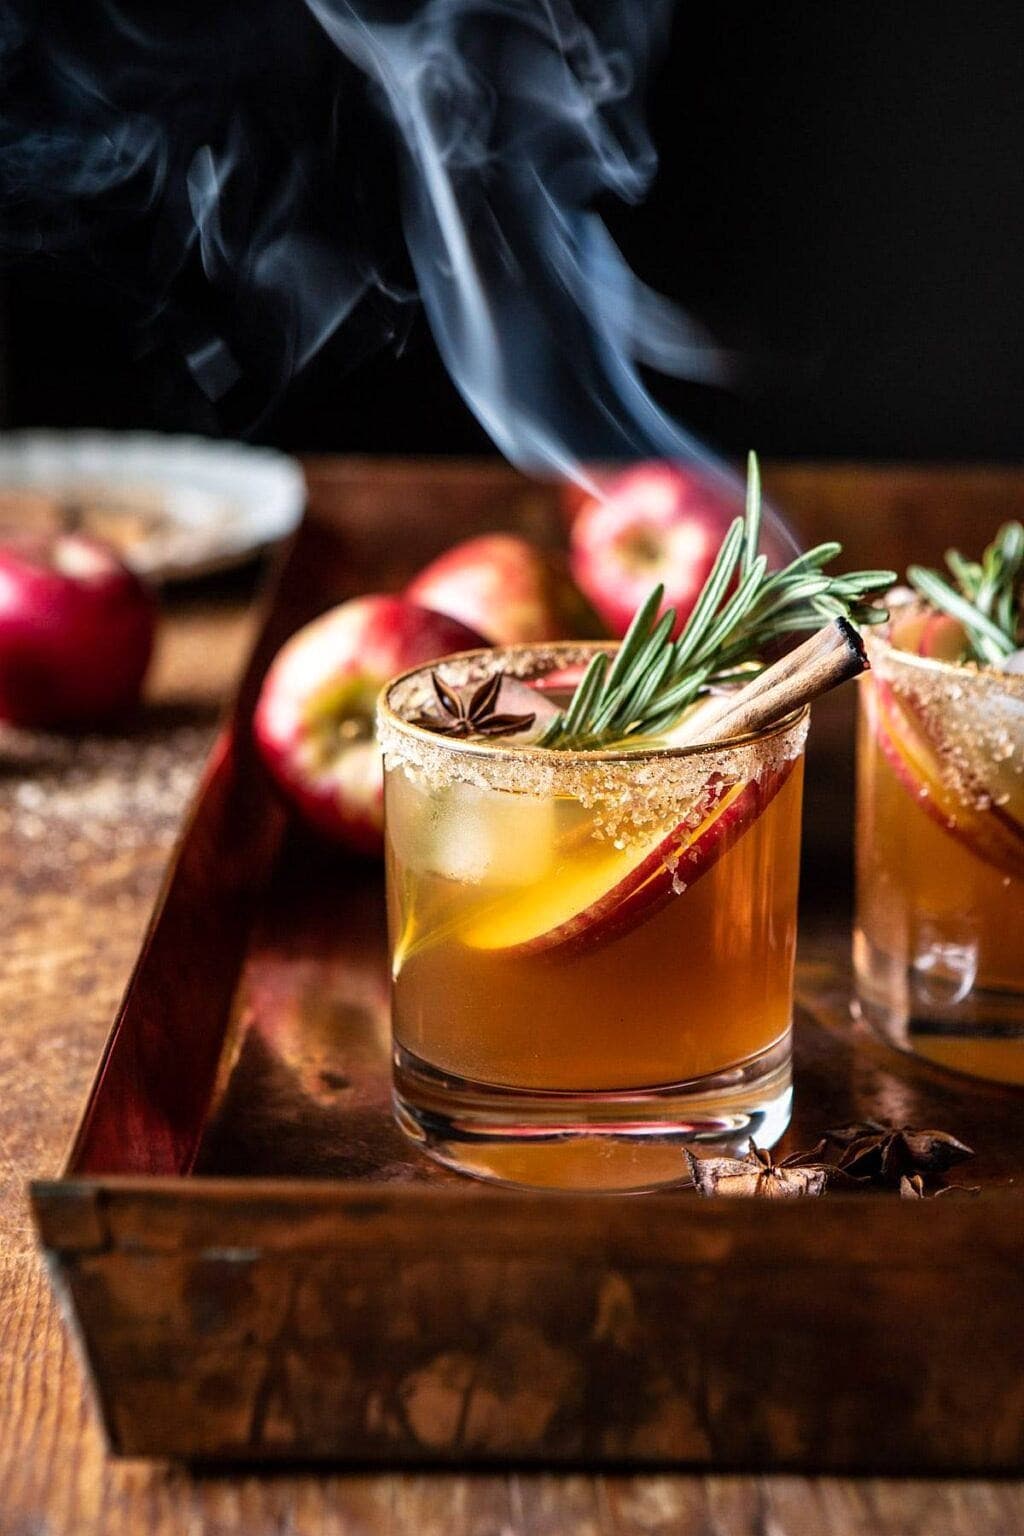 Glass of Smoky Apple Cider Margarita garnished with cinnamon sticks, sliced apple, star anise and rosemary